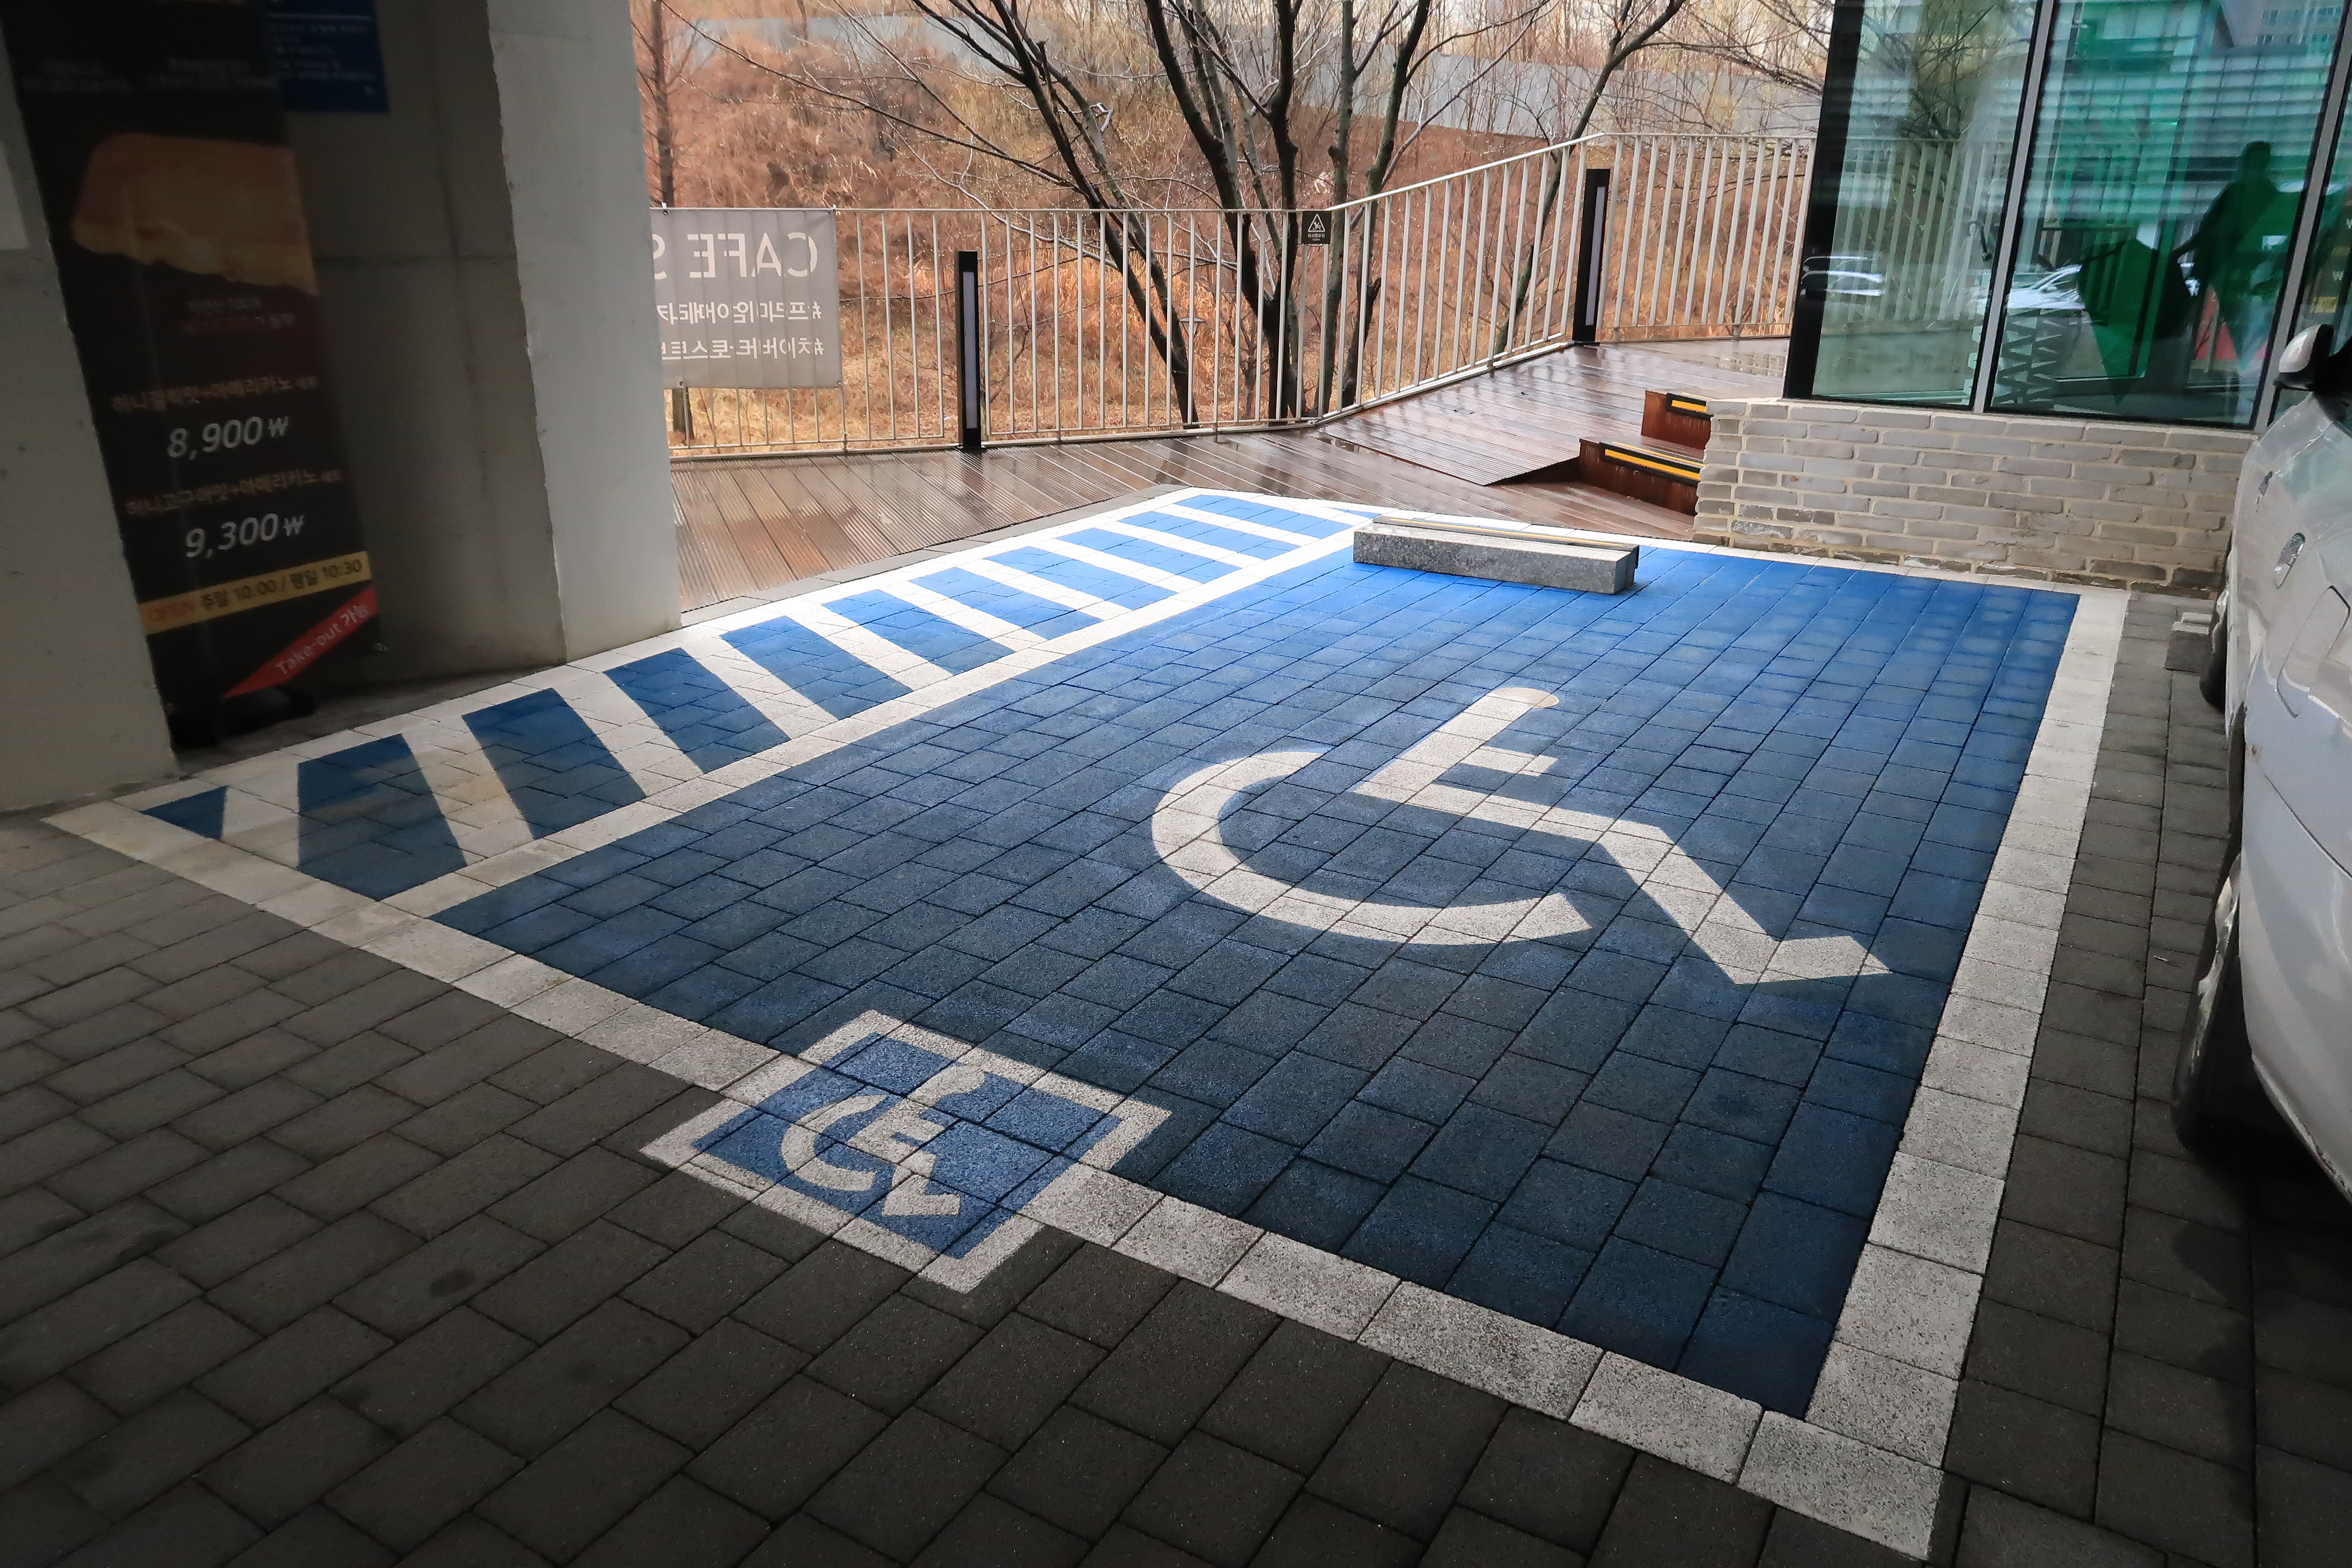 Accessible Parking Lot0 : A view of the ground parking lot at the Savina Museum of Art